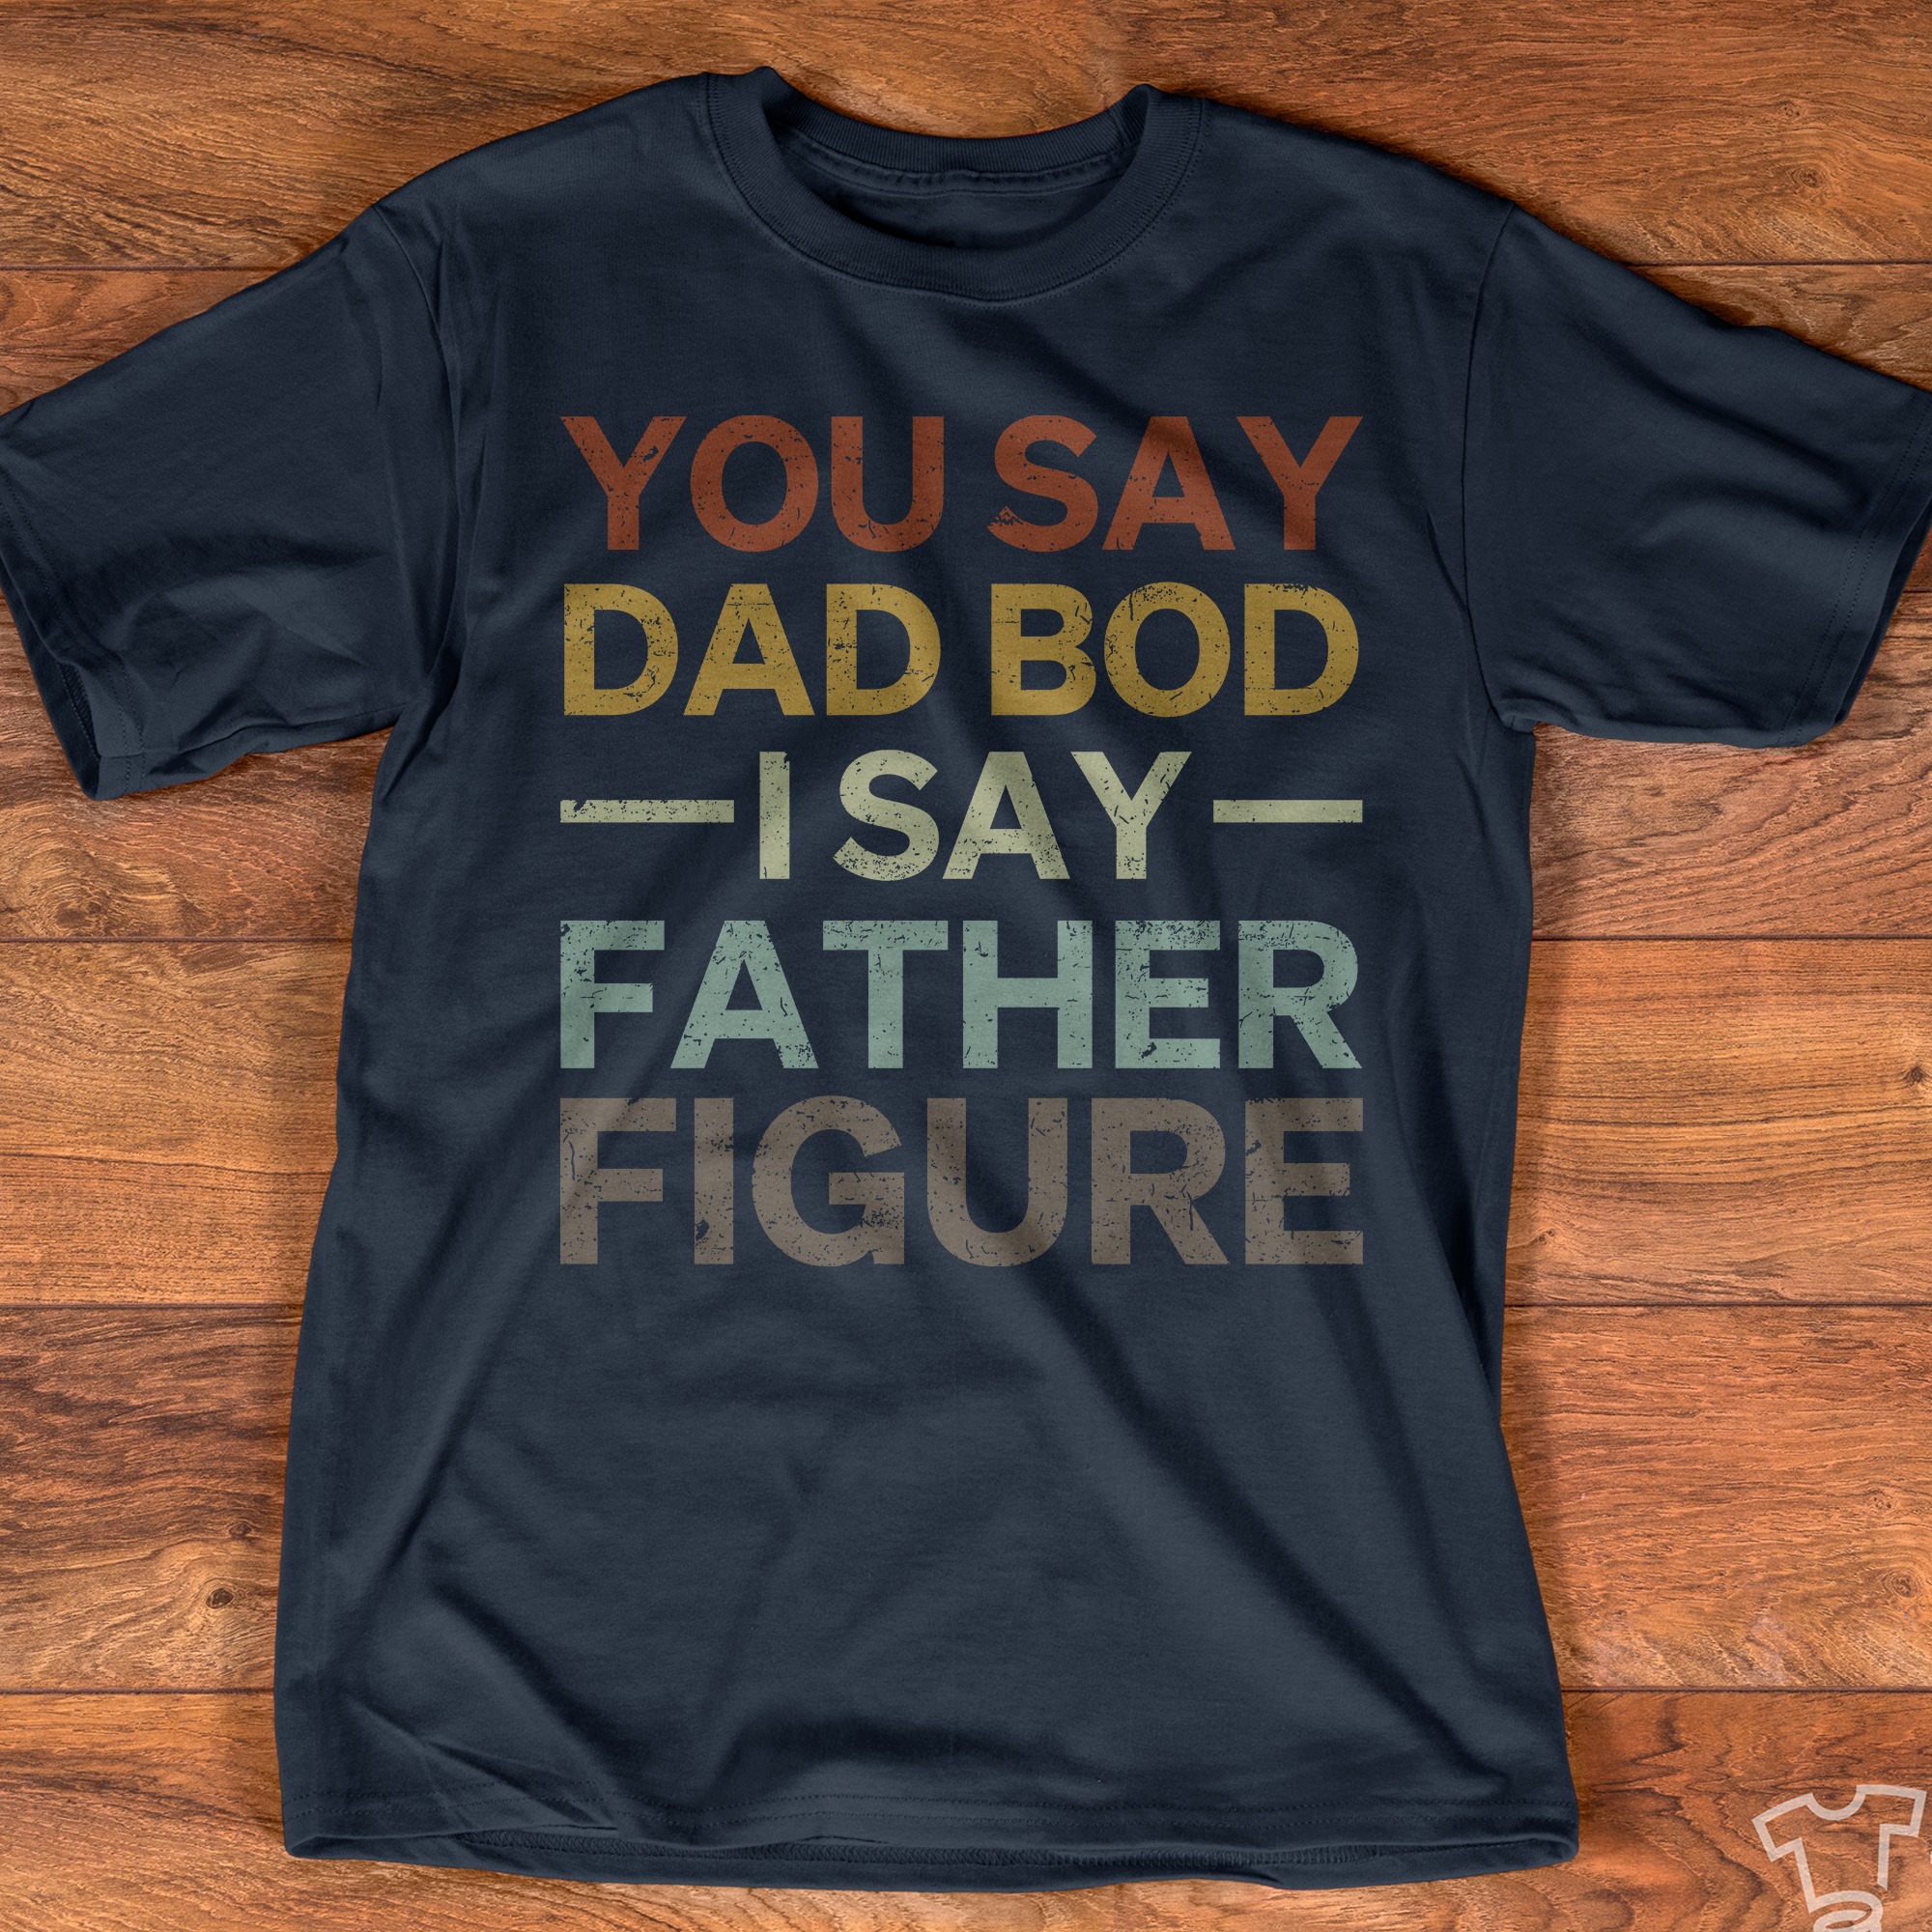 You say dad bod I say father figure